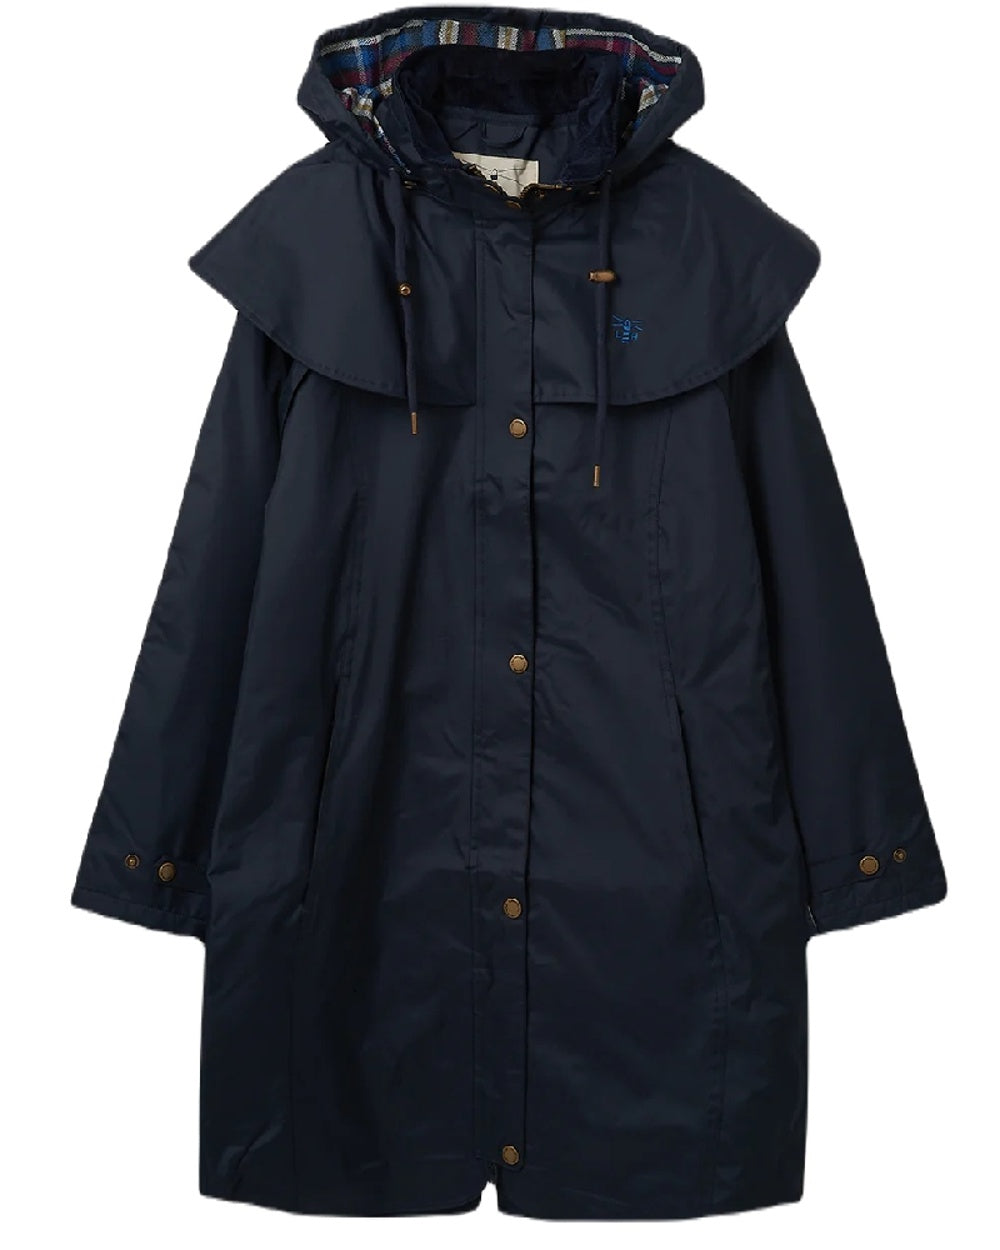 Nightshade coloured Lighthouse Outrider 3/4 Length Ladies Waterproof Raincoat on White background 